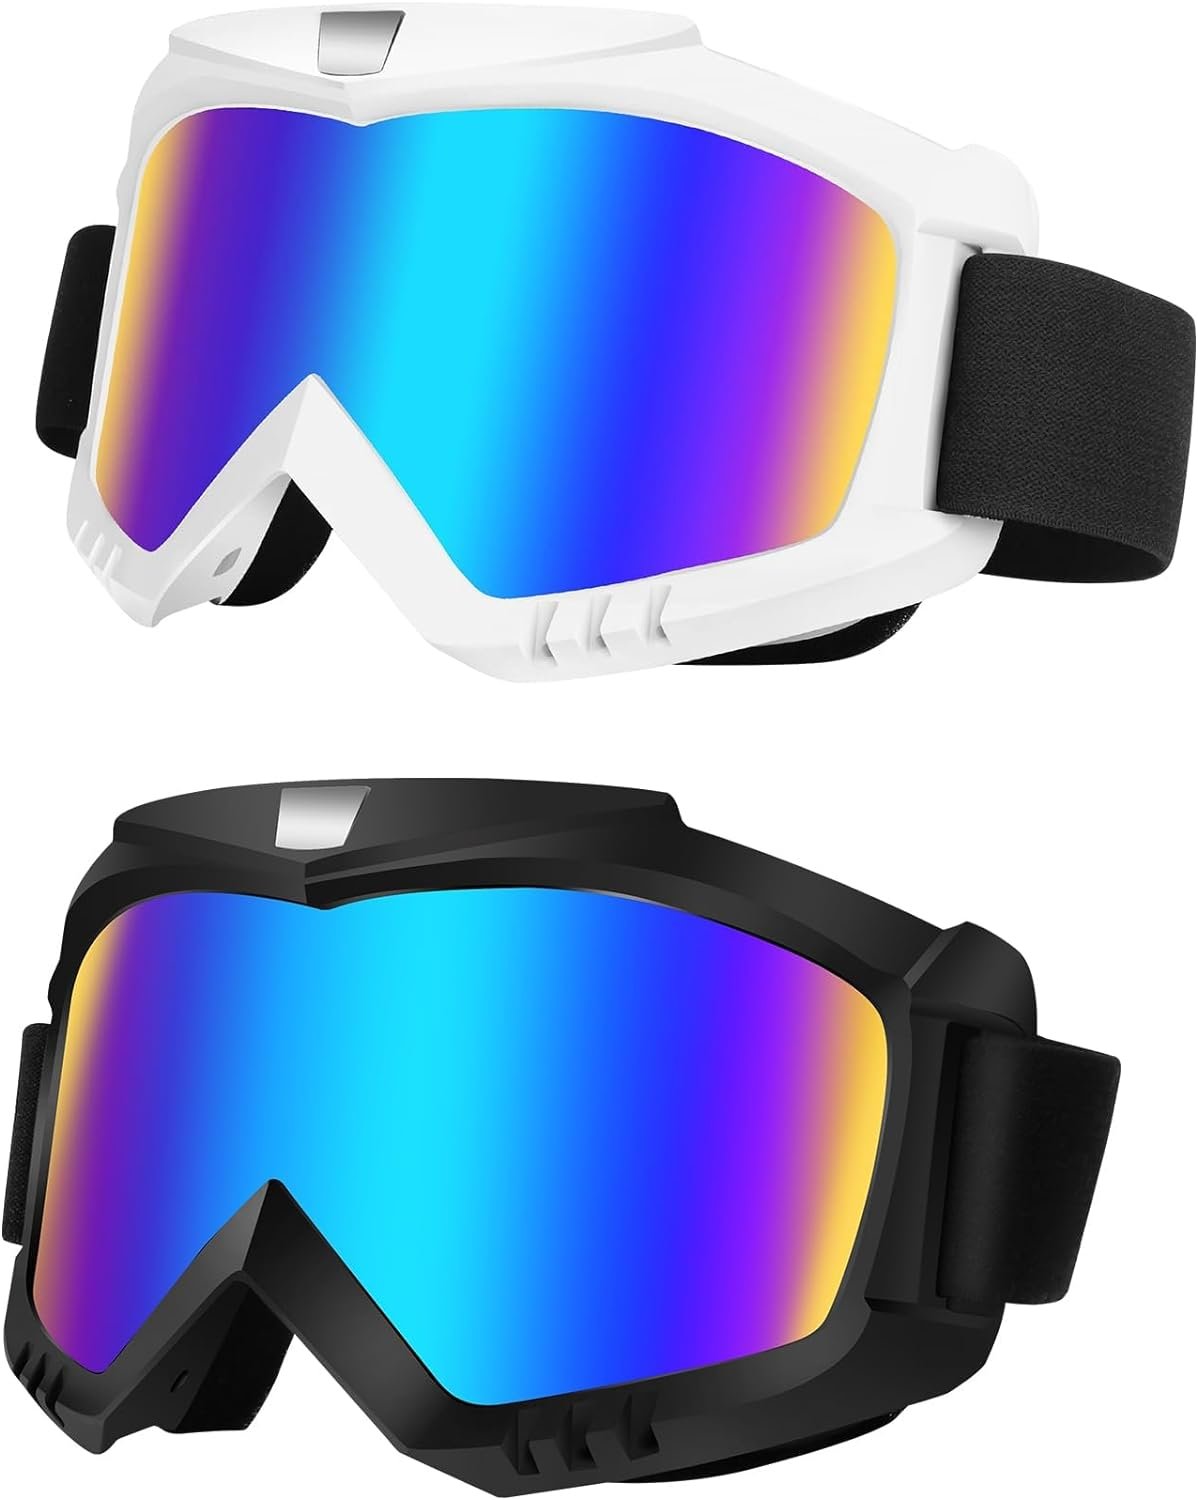 Motorcycle Goggles 2 Pack Review